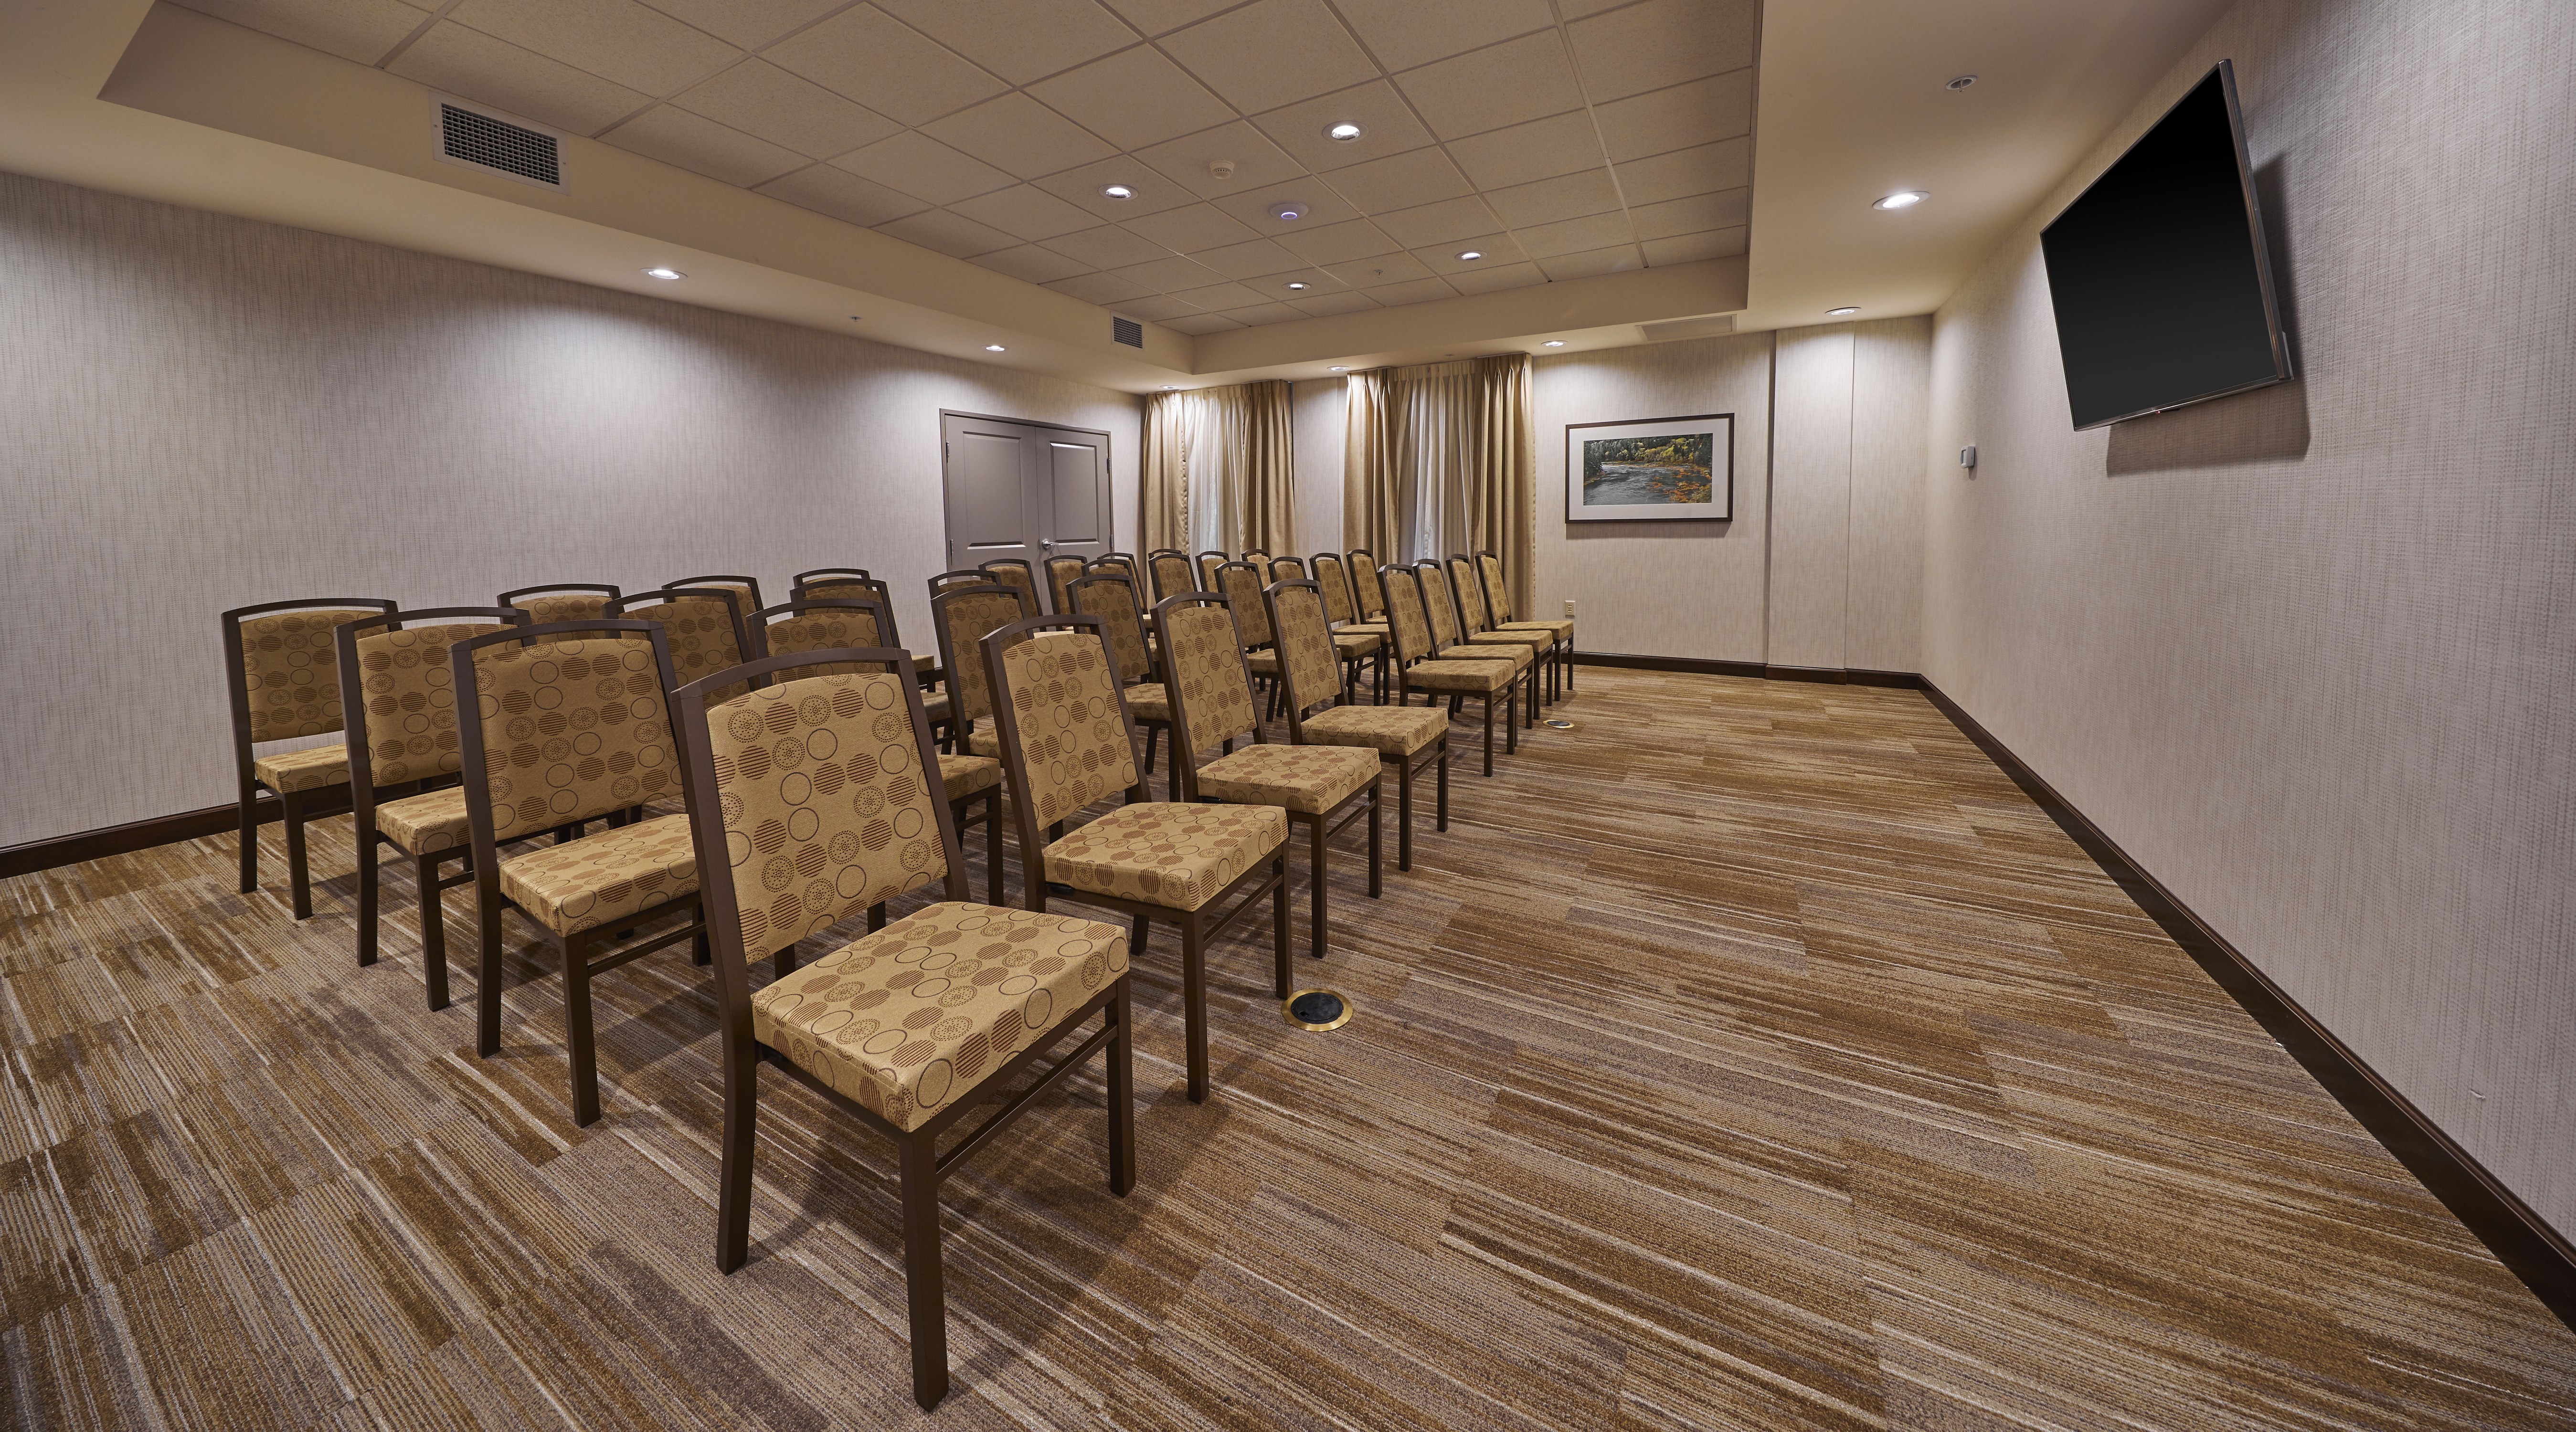 Meeting Room with Chairs and Wall-Mounted TV Screen